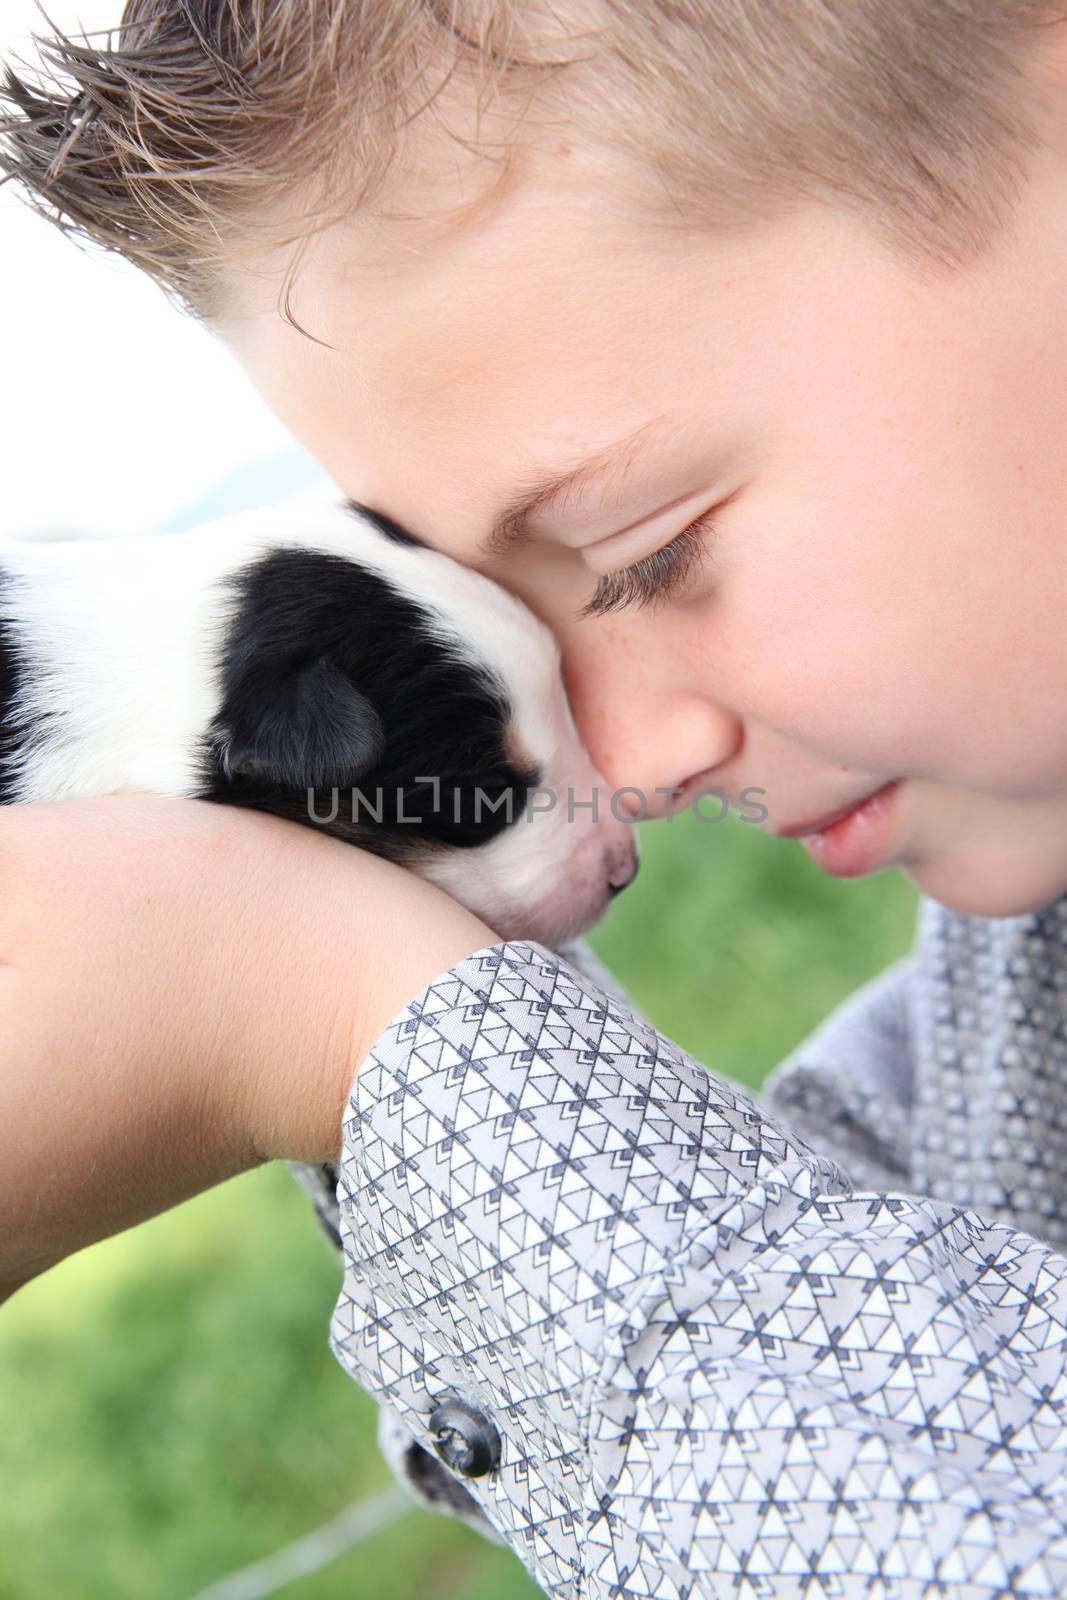 Young boy holding a week hold Border Collie puppy